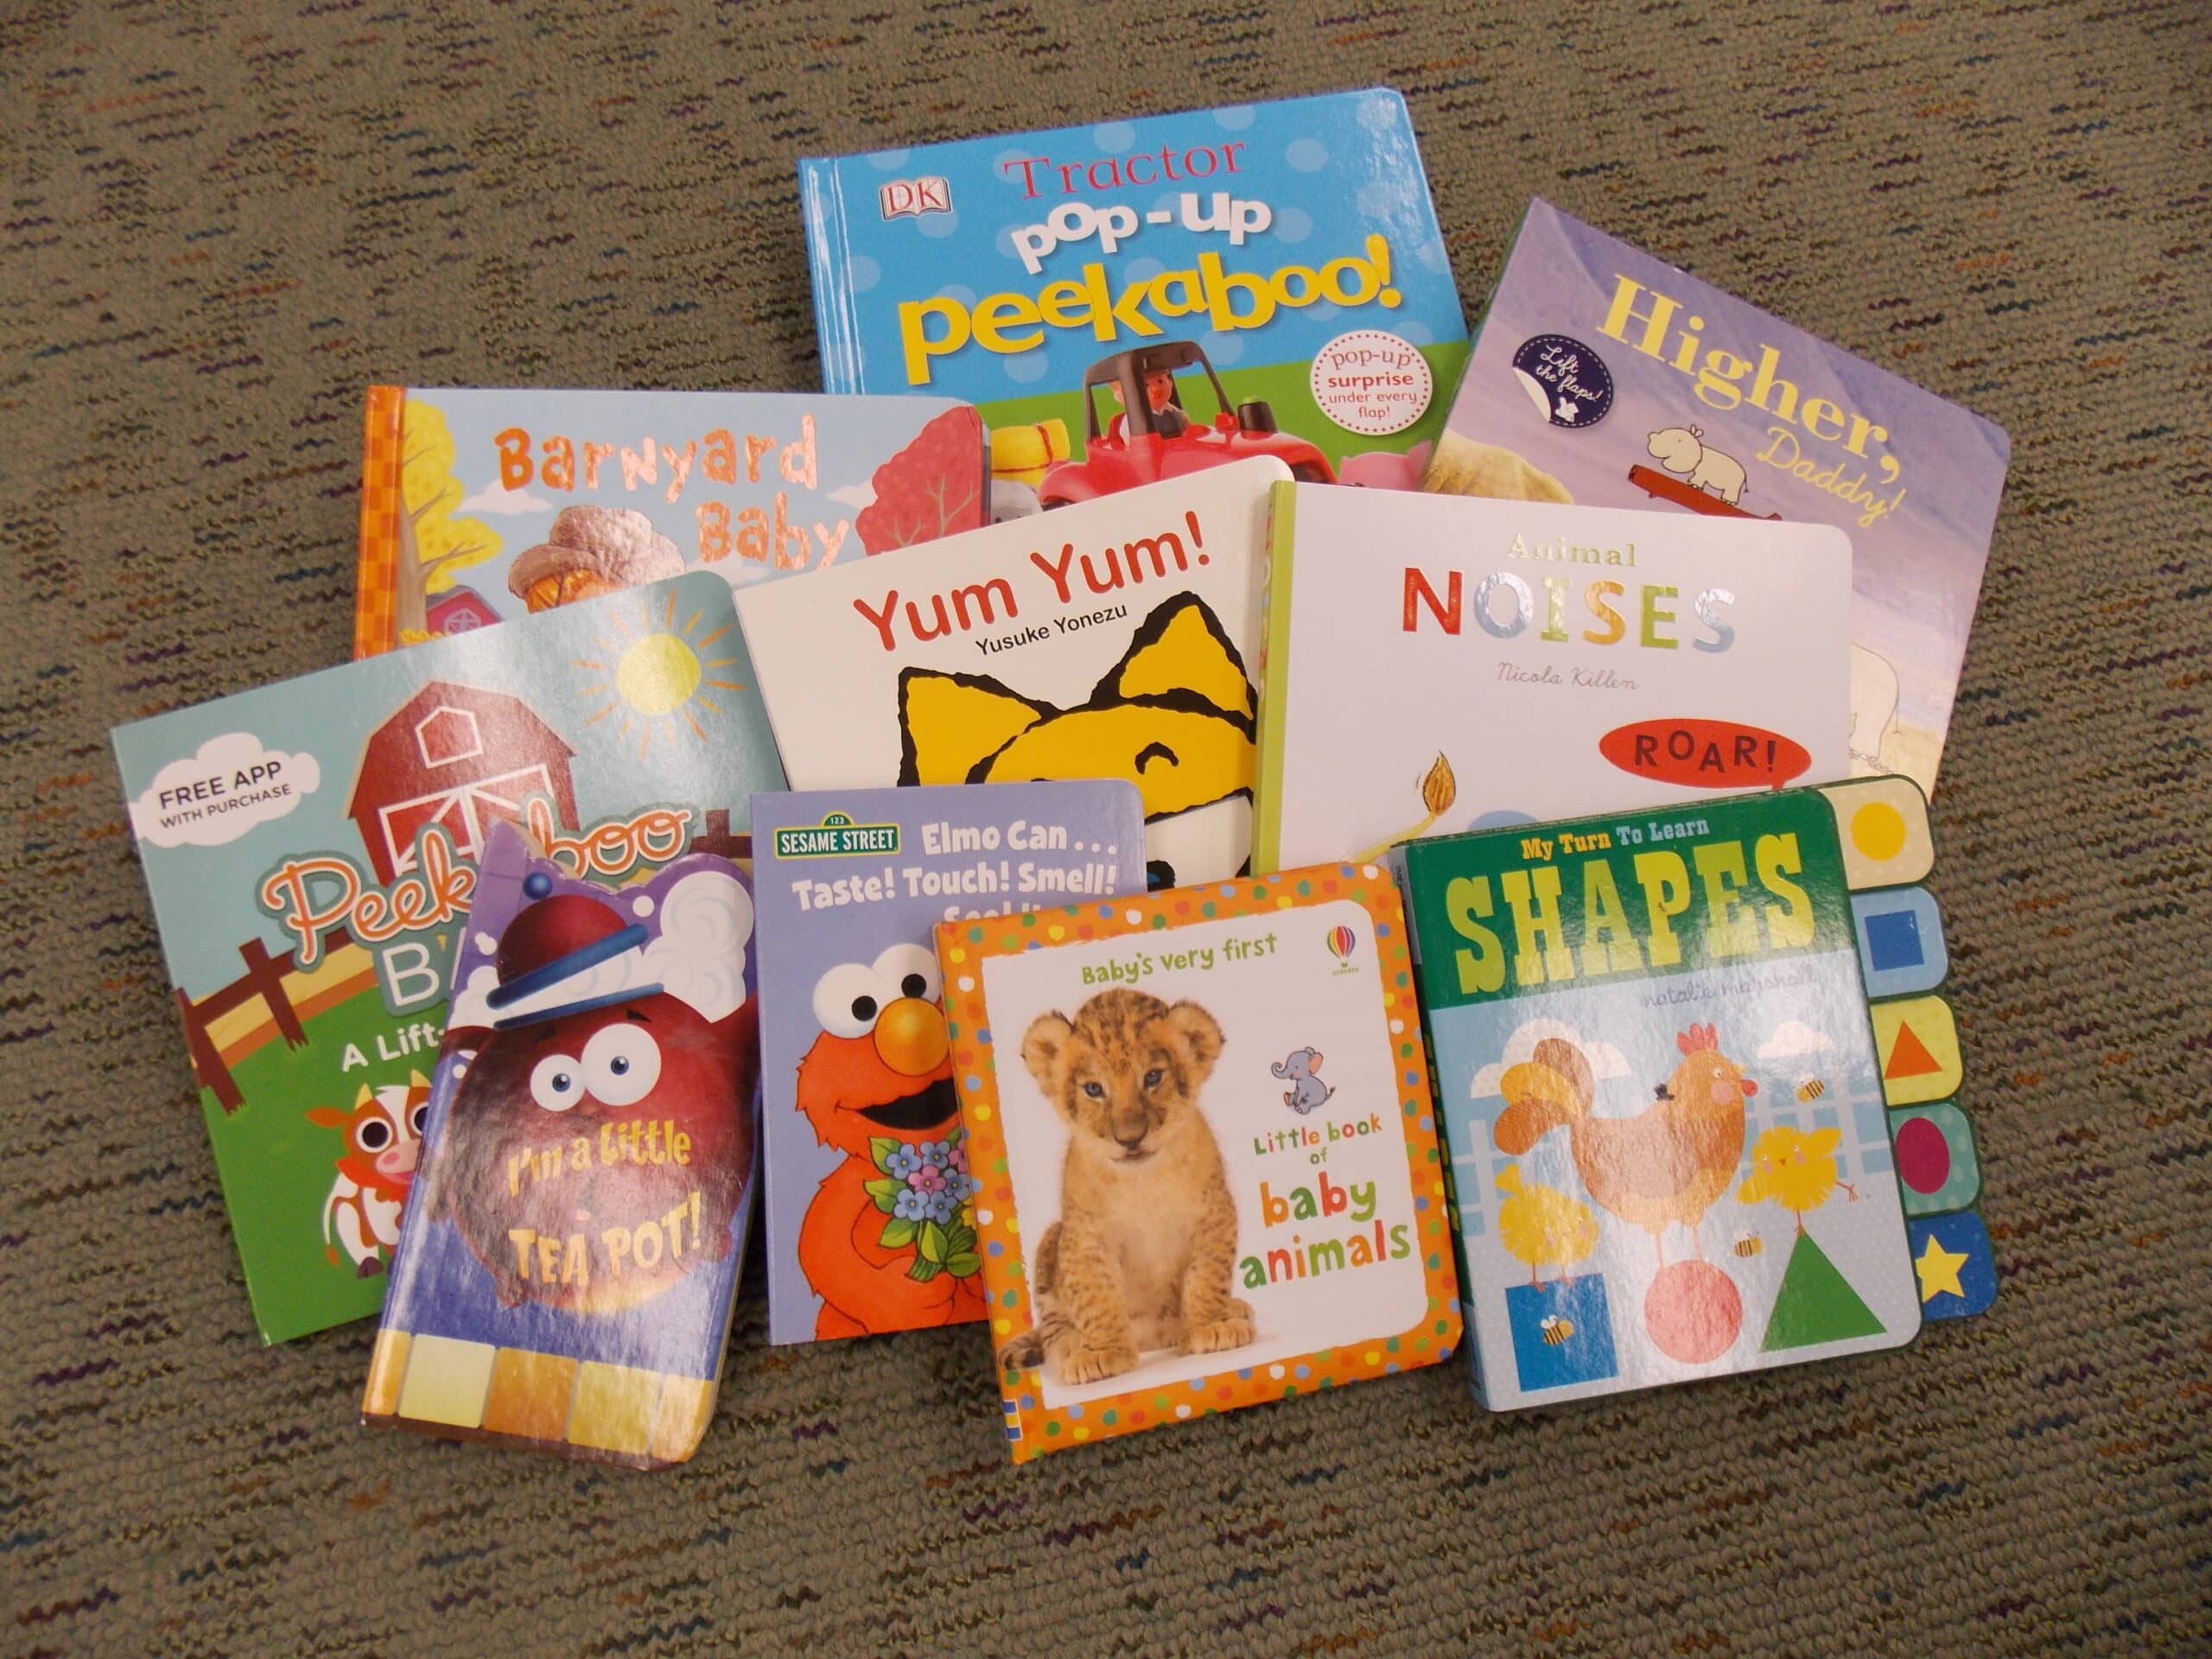 Board books from a Pea Pod pack